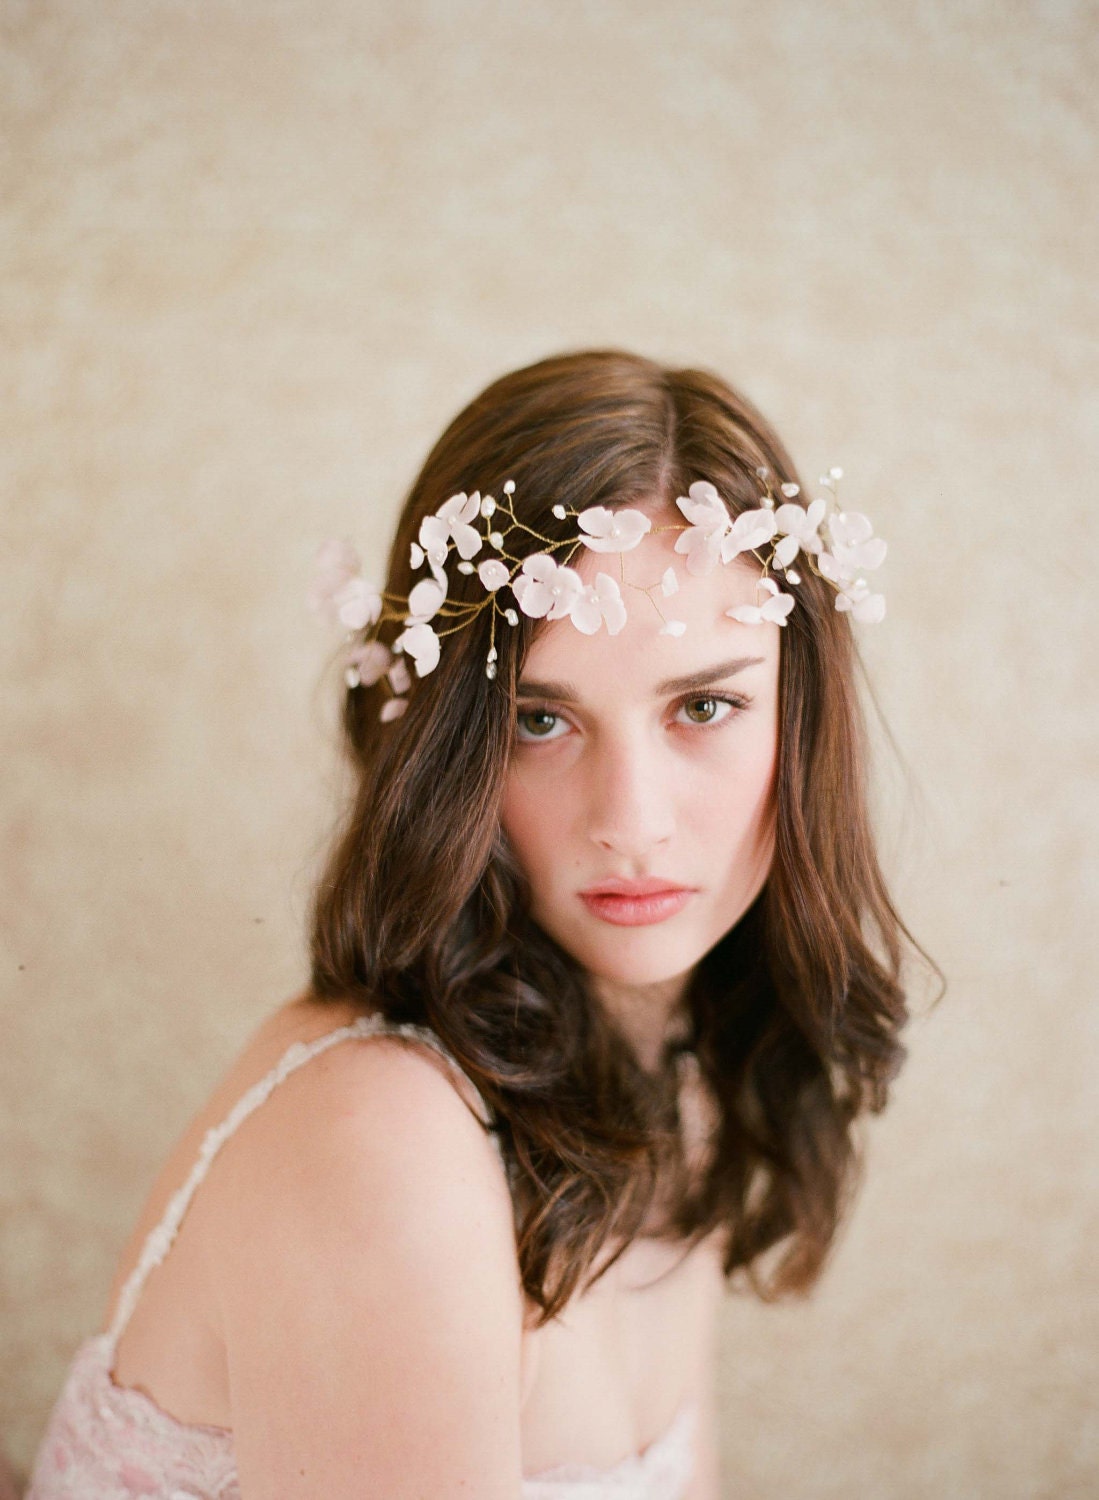 Bridal silk flower blossom halo - Blushing floral crown - Style 207 - Made to Order